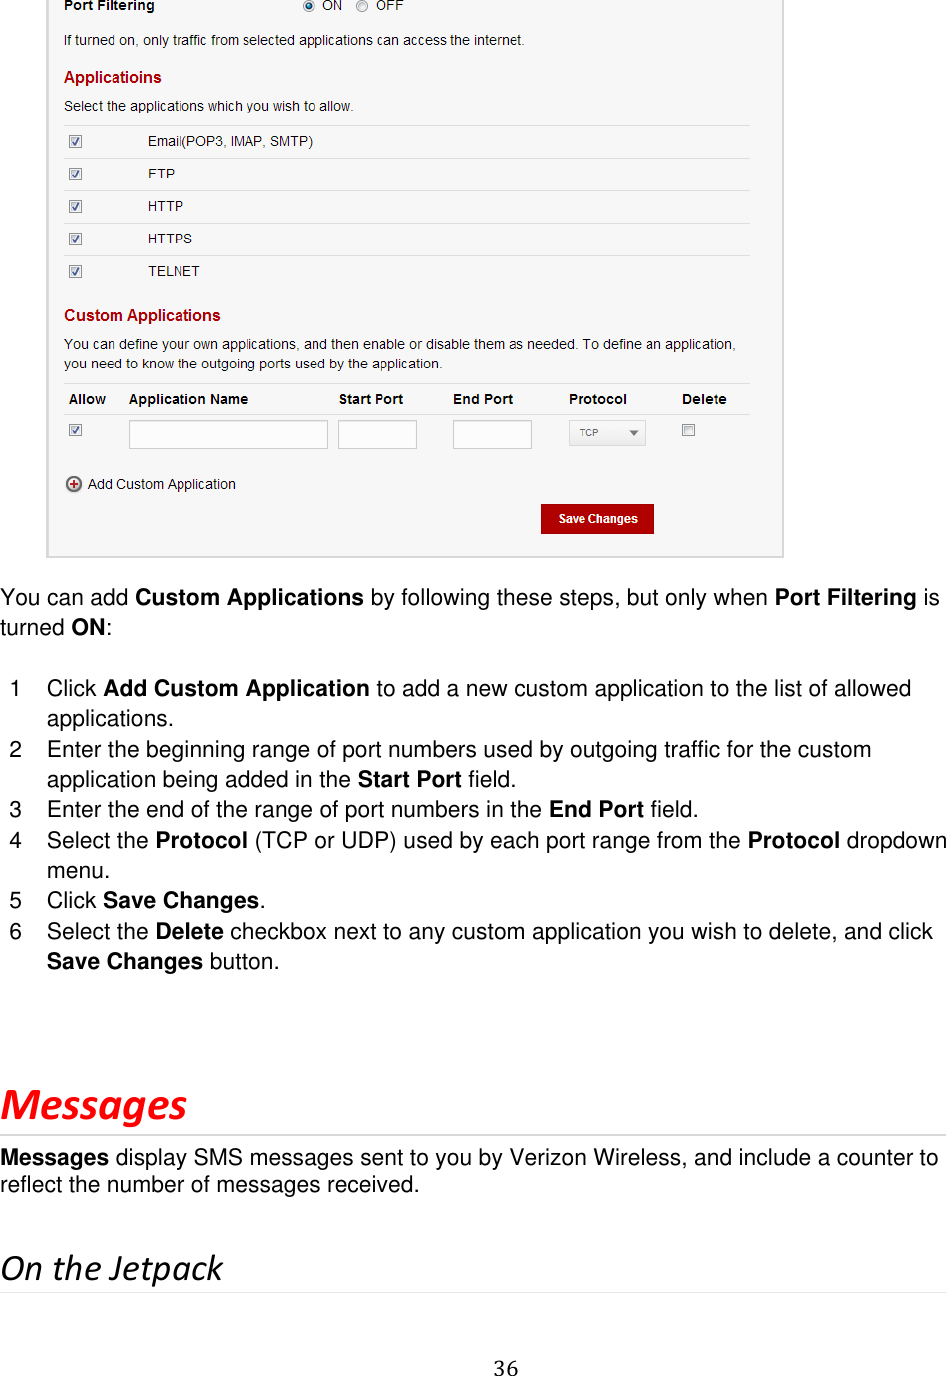   36            You can add Custom Applications by following these steps, but only when Port Filtering is turned ON:  1  Click Add Custom Application to add a new custom application to the list of allowed applications.  2  Enter the beginning range of port numbers used by outgoing traffic for the custom application being added in the Start Port field. 3  Enter the end of the range of port numbers in the End Port field.  4  Select the Protocol (TCP or UDP) used by each port range from the Protocol dropdown menu. 5  Click Save Changes. 6  Select the Delete checkbox next to any custom application you wish to delete, and click Save Changes button.  Messages Messages display SMS messages sent to you by Verizon Wireless, and include a counter to reflect the number of messages received.  On the Jetpack 